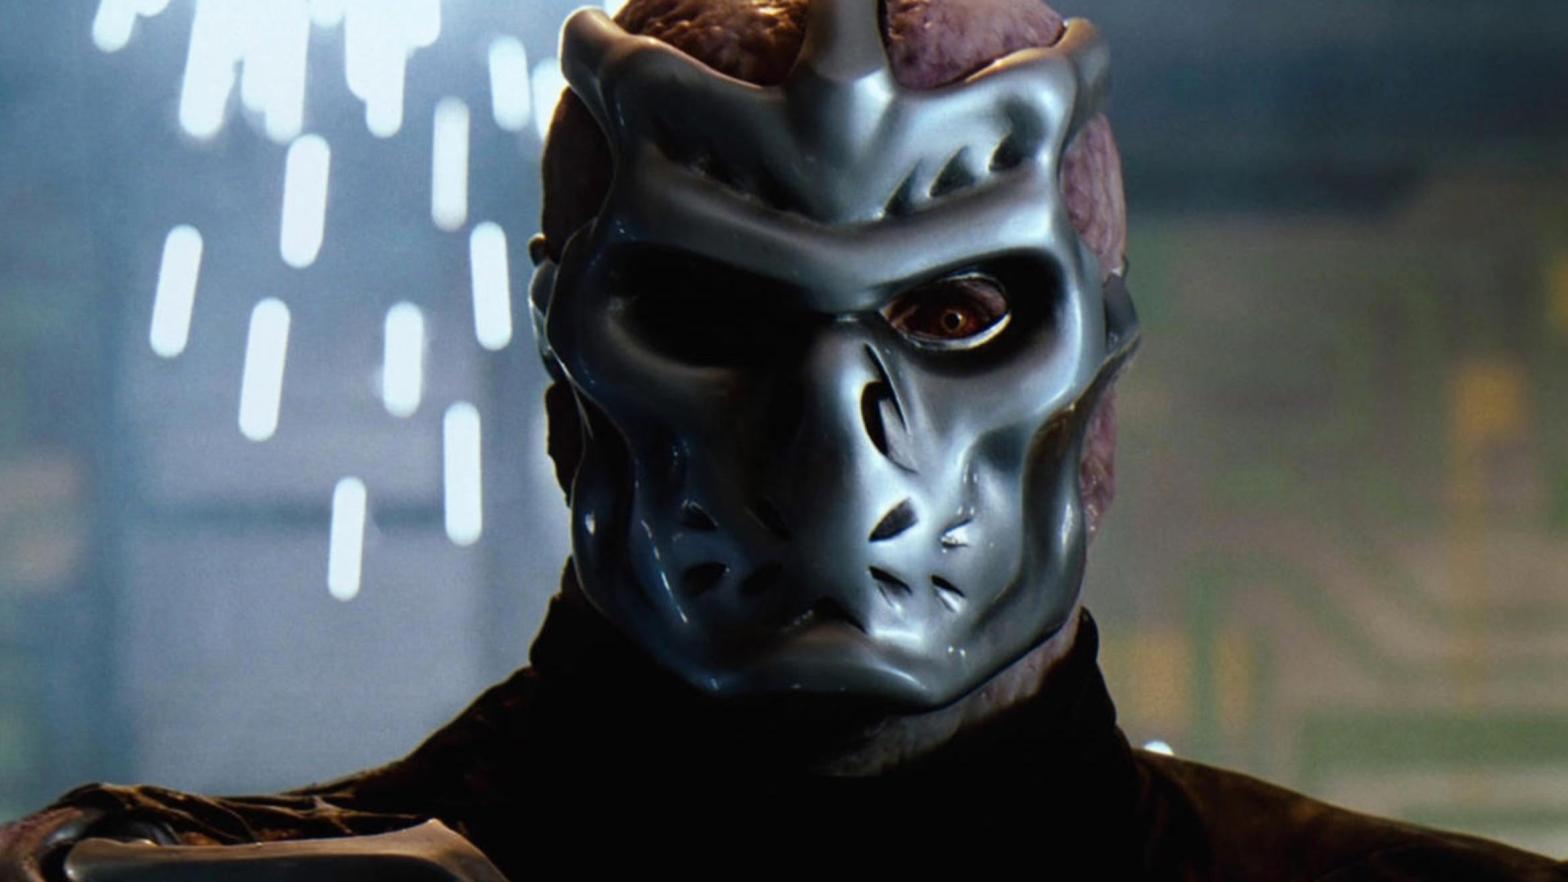 It probably won't go full Jason X, but Crystal Lake can use all iterations of Jason. (Image: New Line)